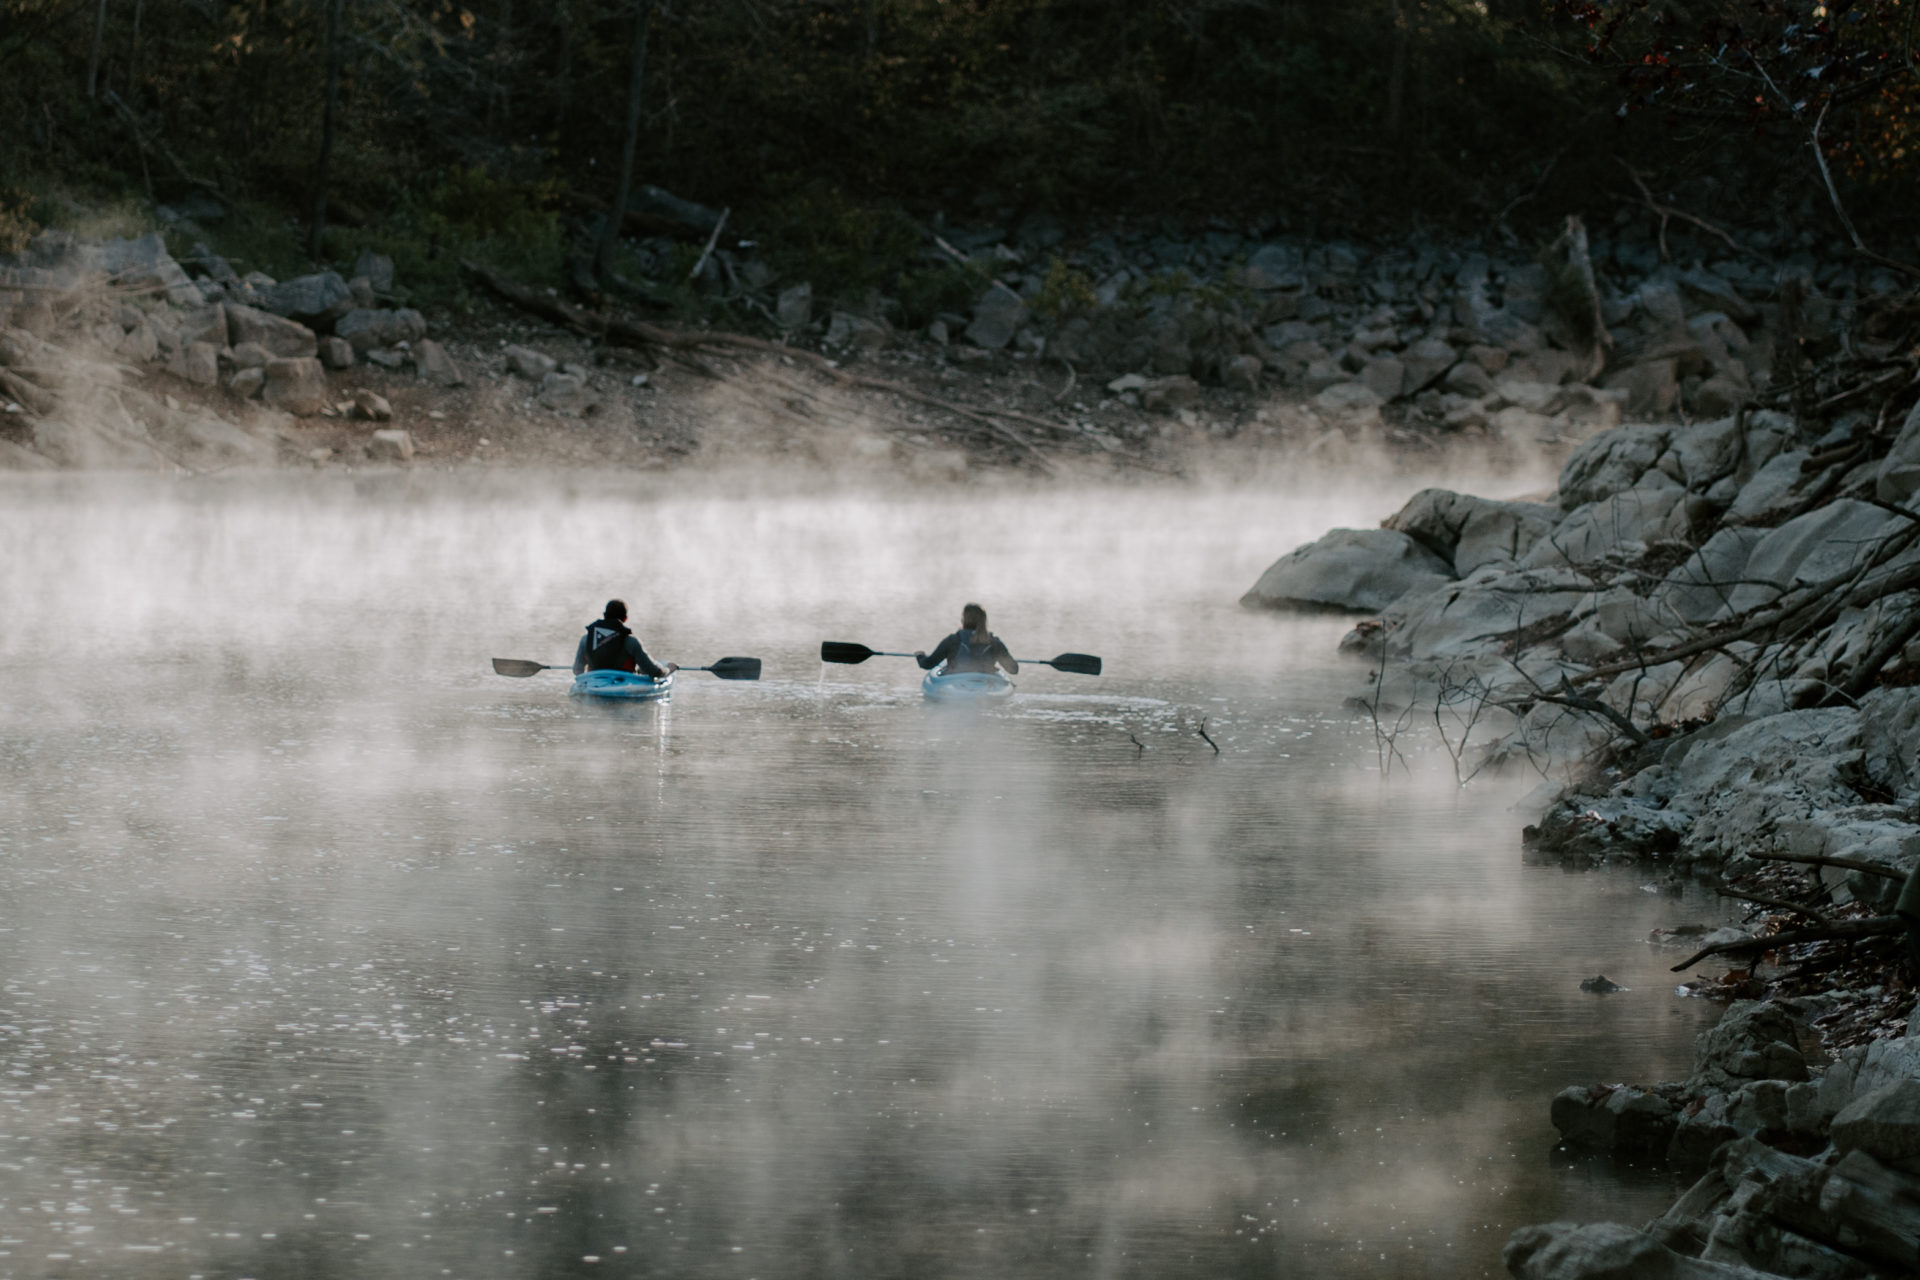 Lifestyle photography of two people kayaking on a foggy body of water in East TN.